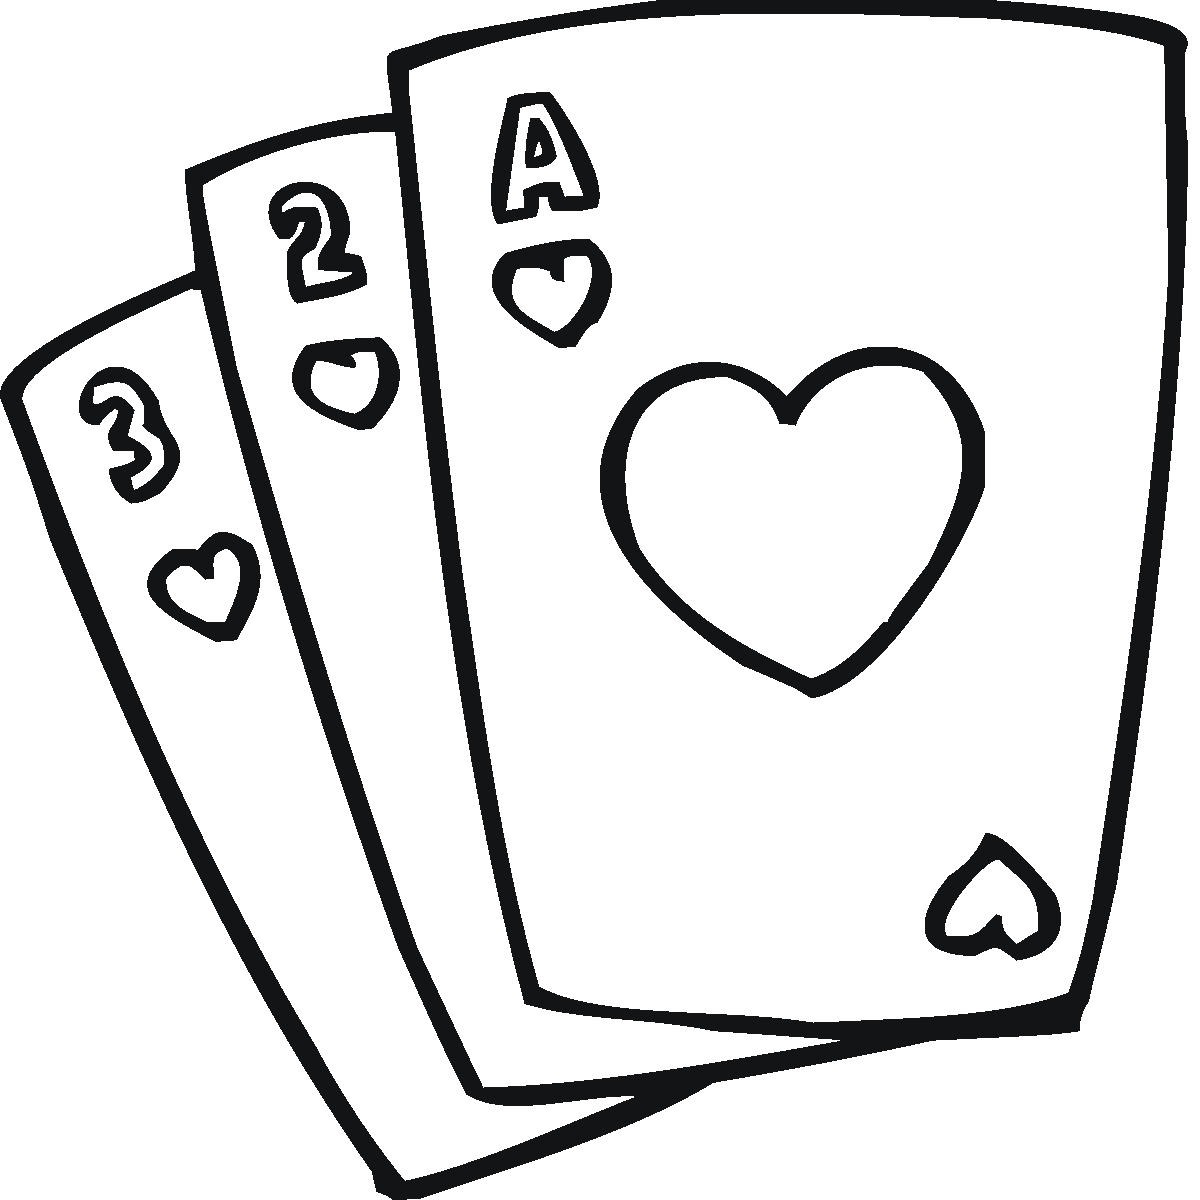 Love Poker Cards Click To View - ClipArt Best - ClipArt Best